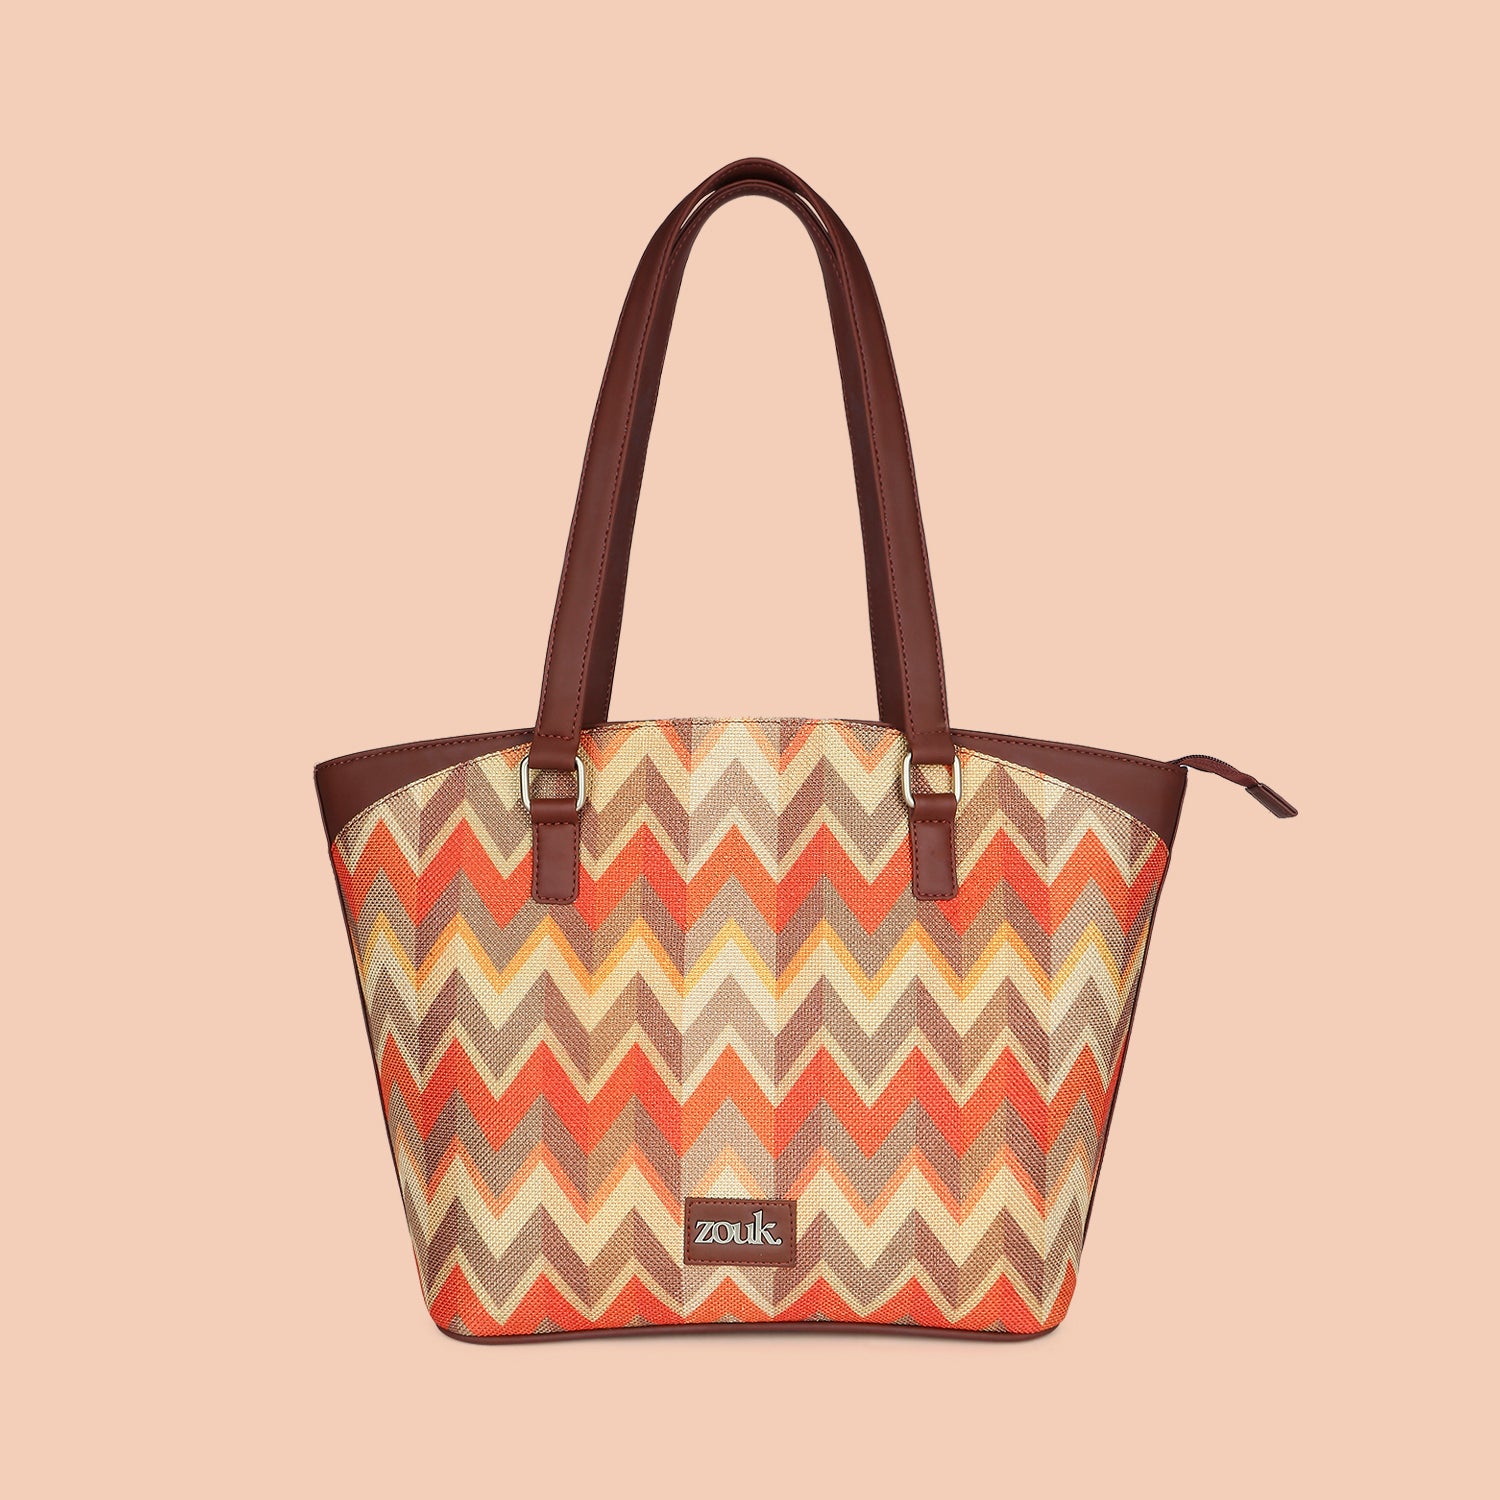 Tidal Wave Classic Travel Tote